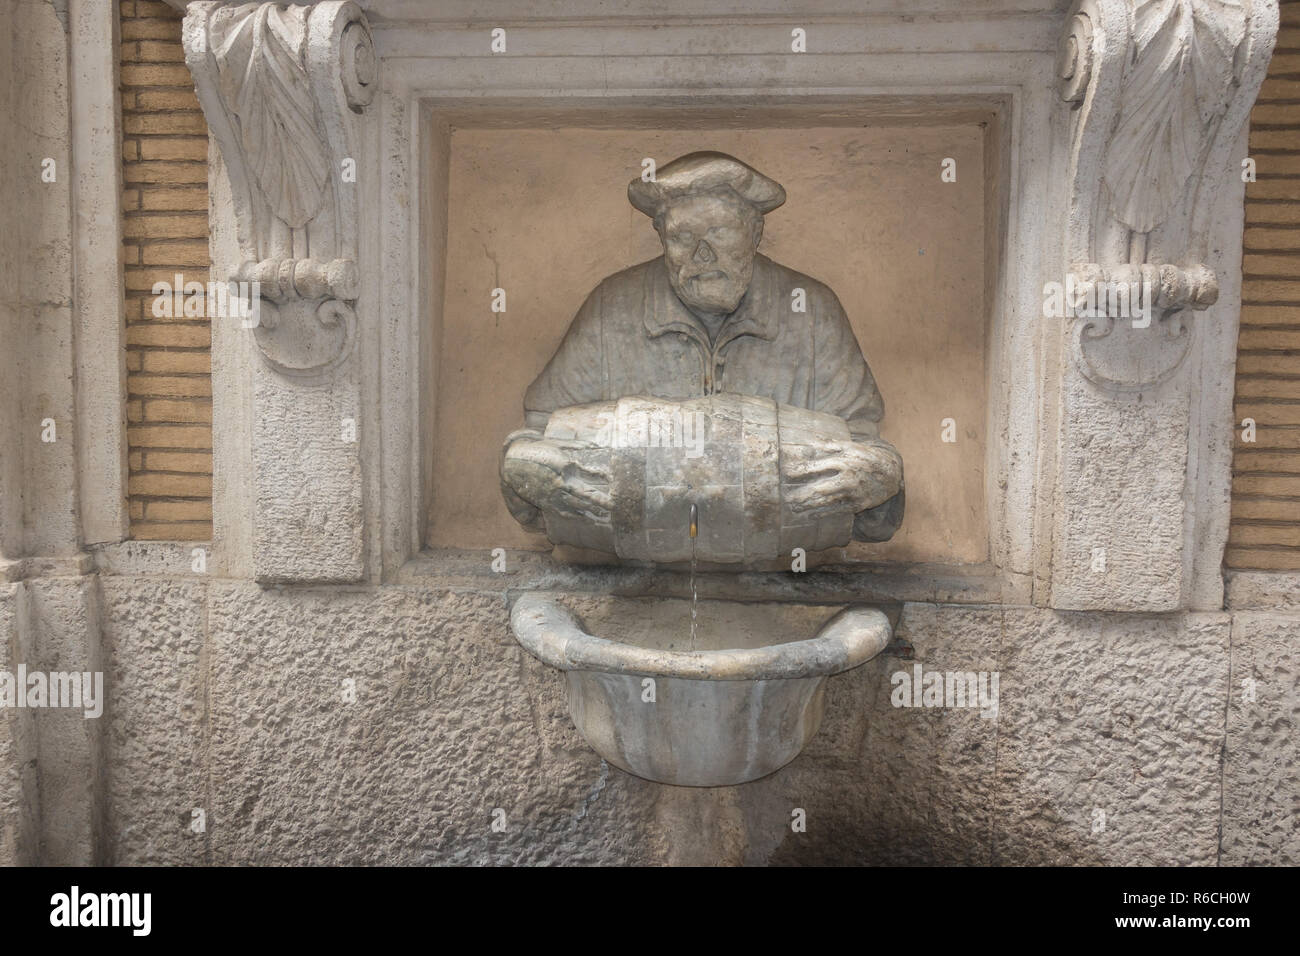 Water carrier fountain, Rome, Italy, aka Fountain of The Porter (Fontana Del Facchino), depicts 16th century seller of water. Stock Photo